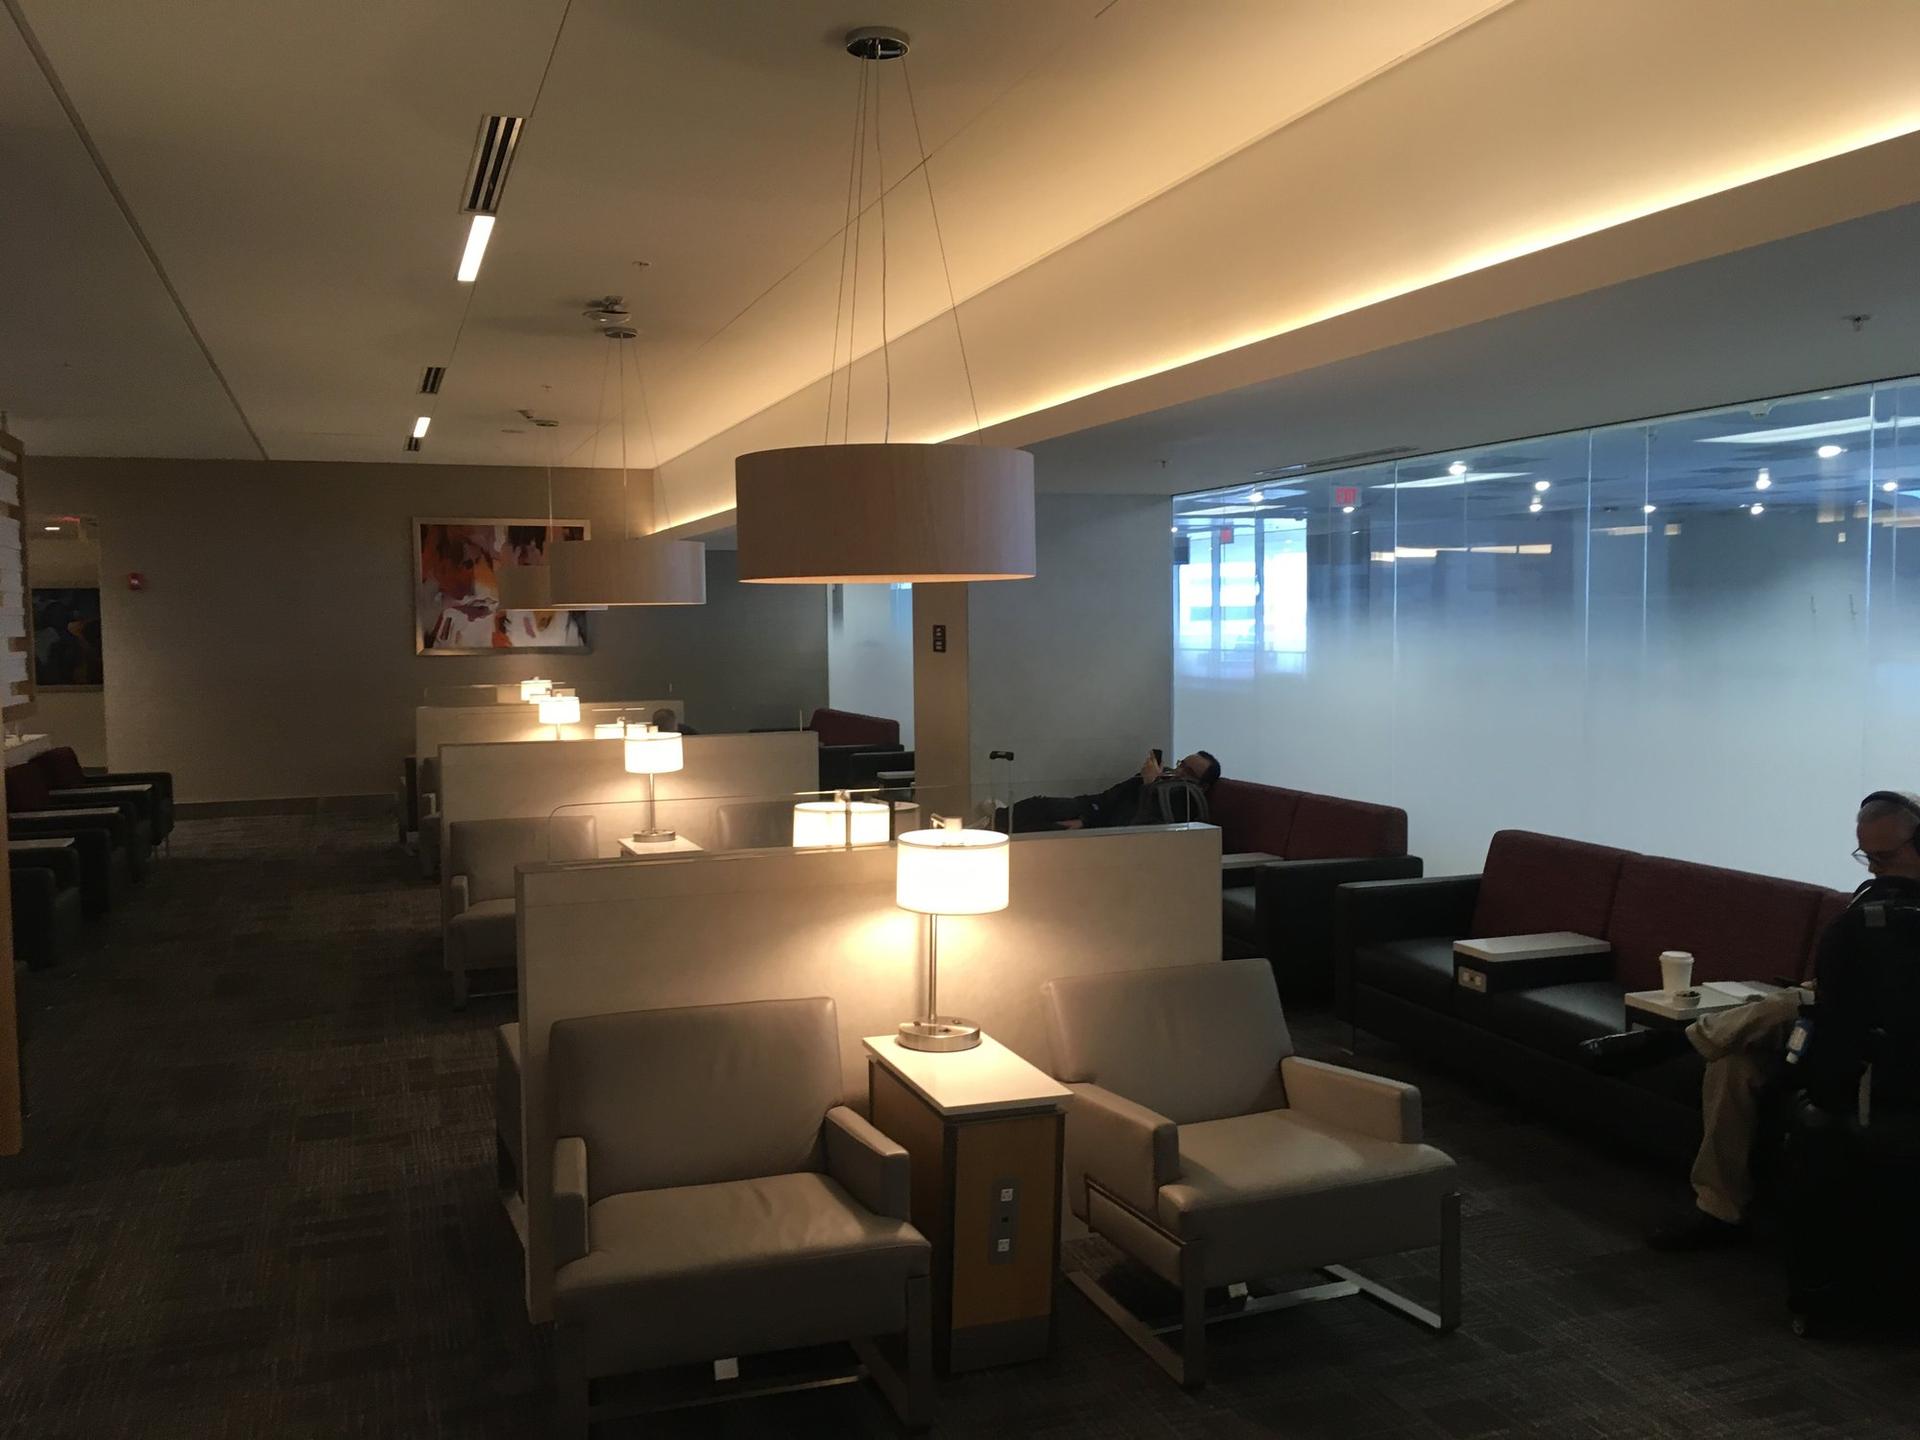 American Airlines Flagship Lounge image 53 of 65